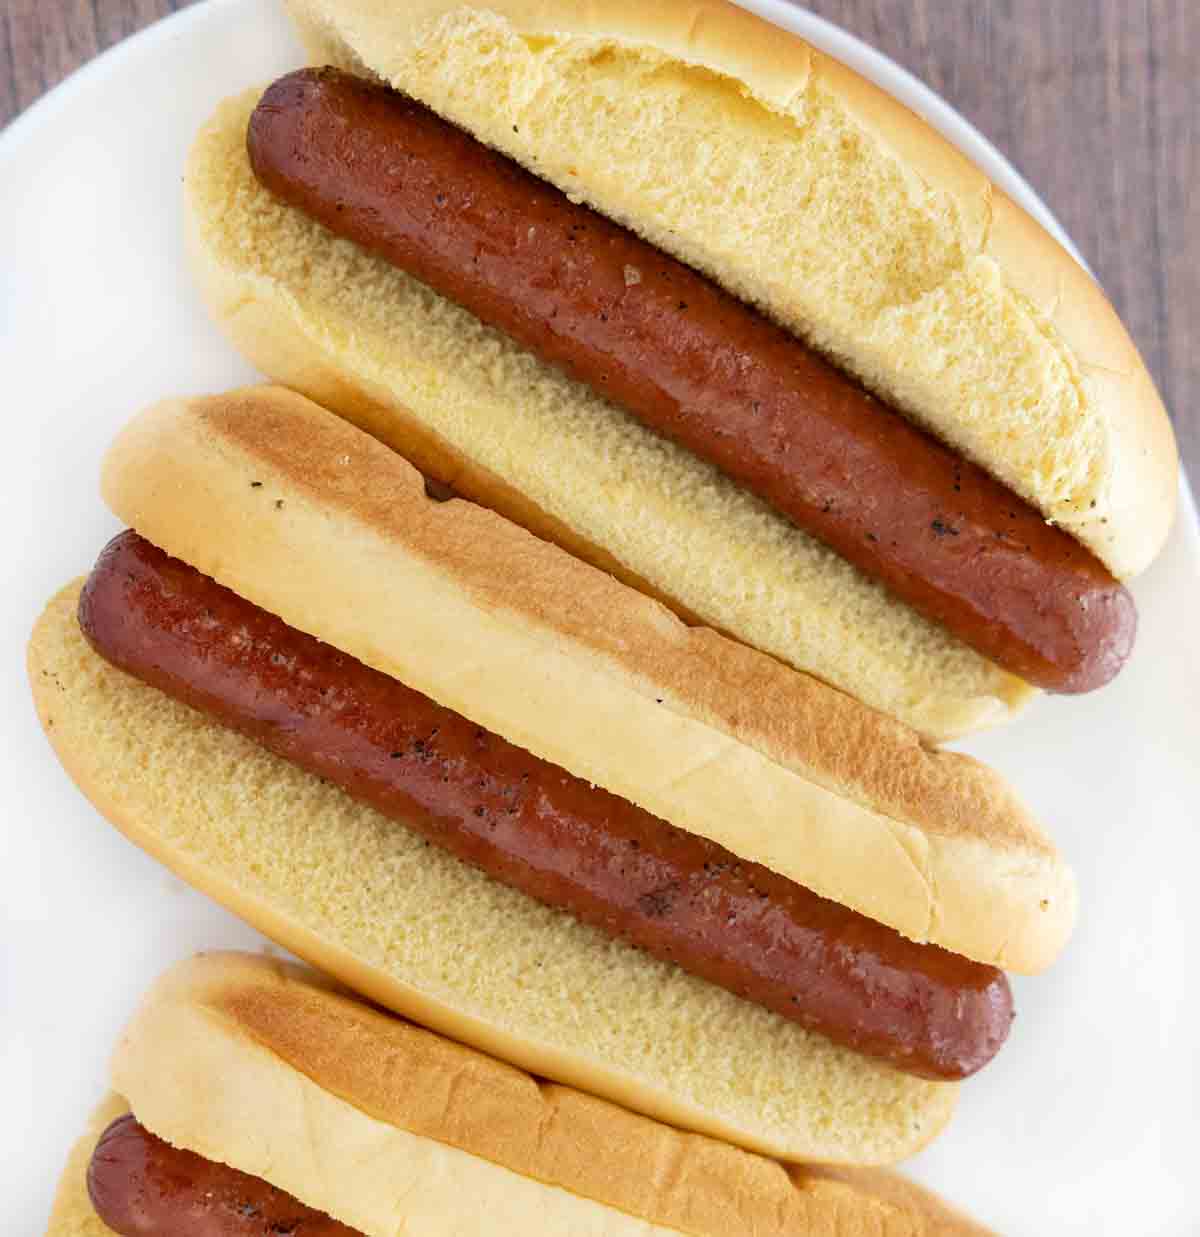 The Best Turkey and Chicken Hot Dogs You Can Buy at the Store or